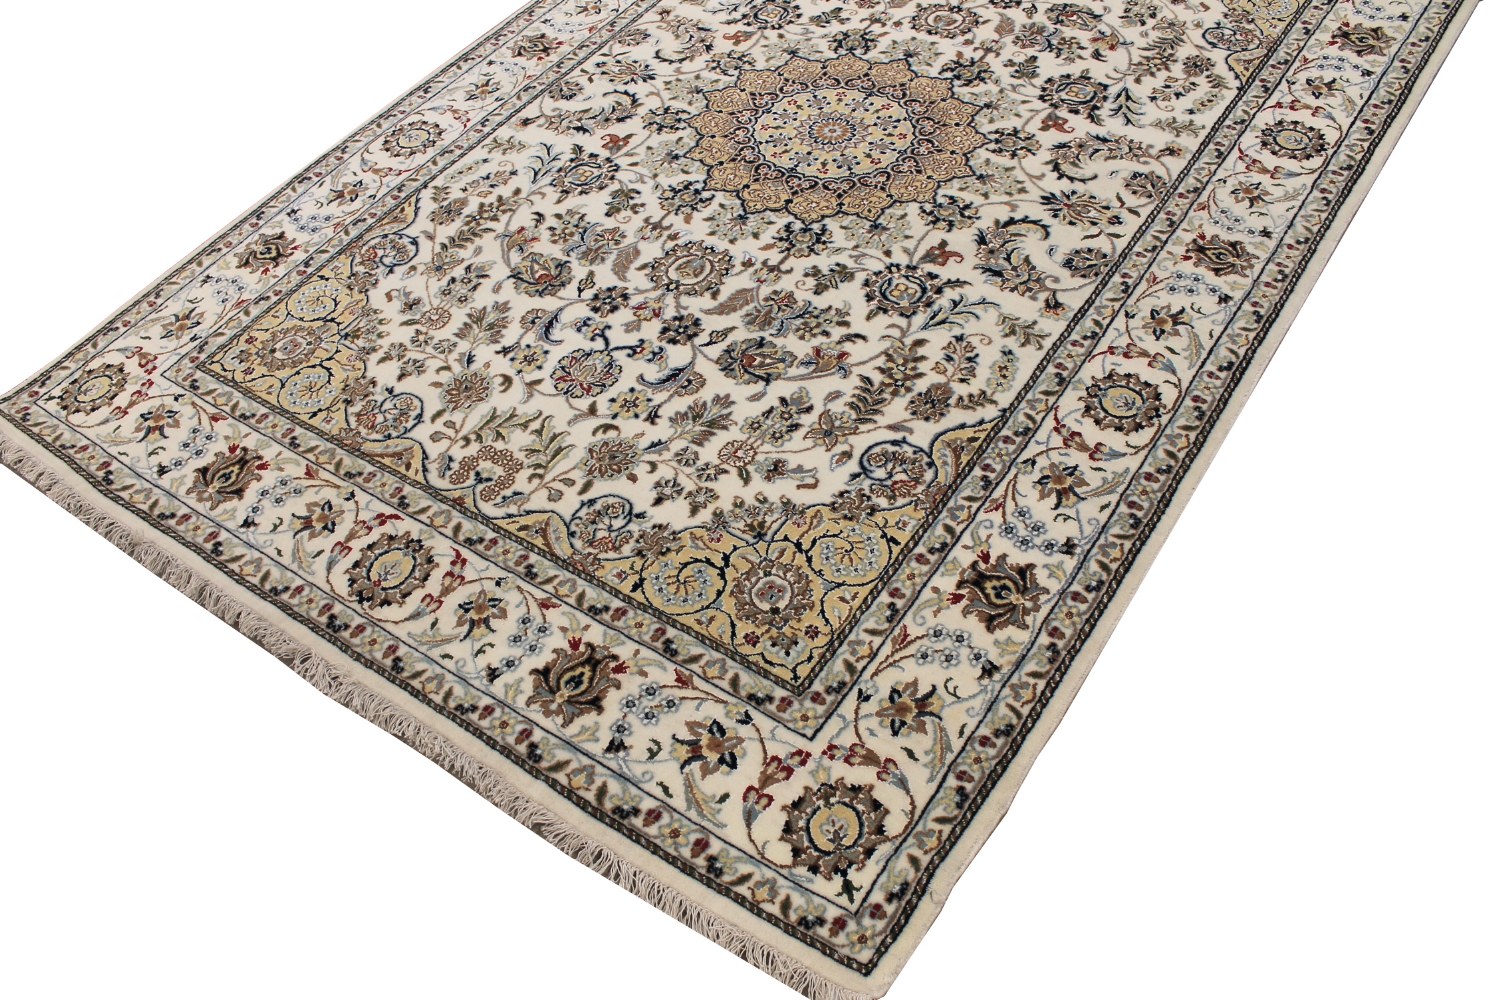 6x9 Traditional Hand Knotted Wool Area Rug - MR028295